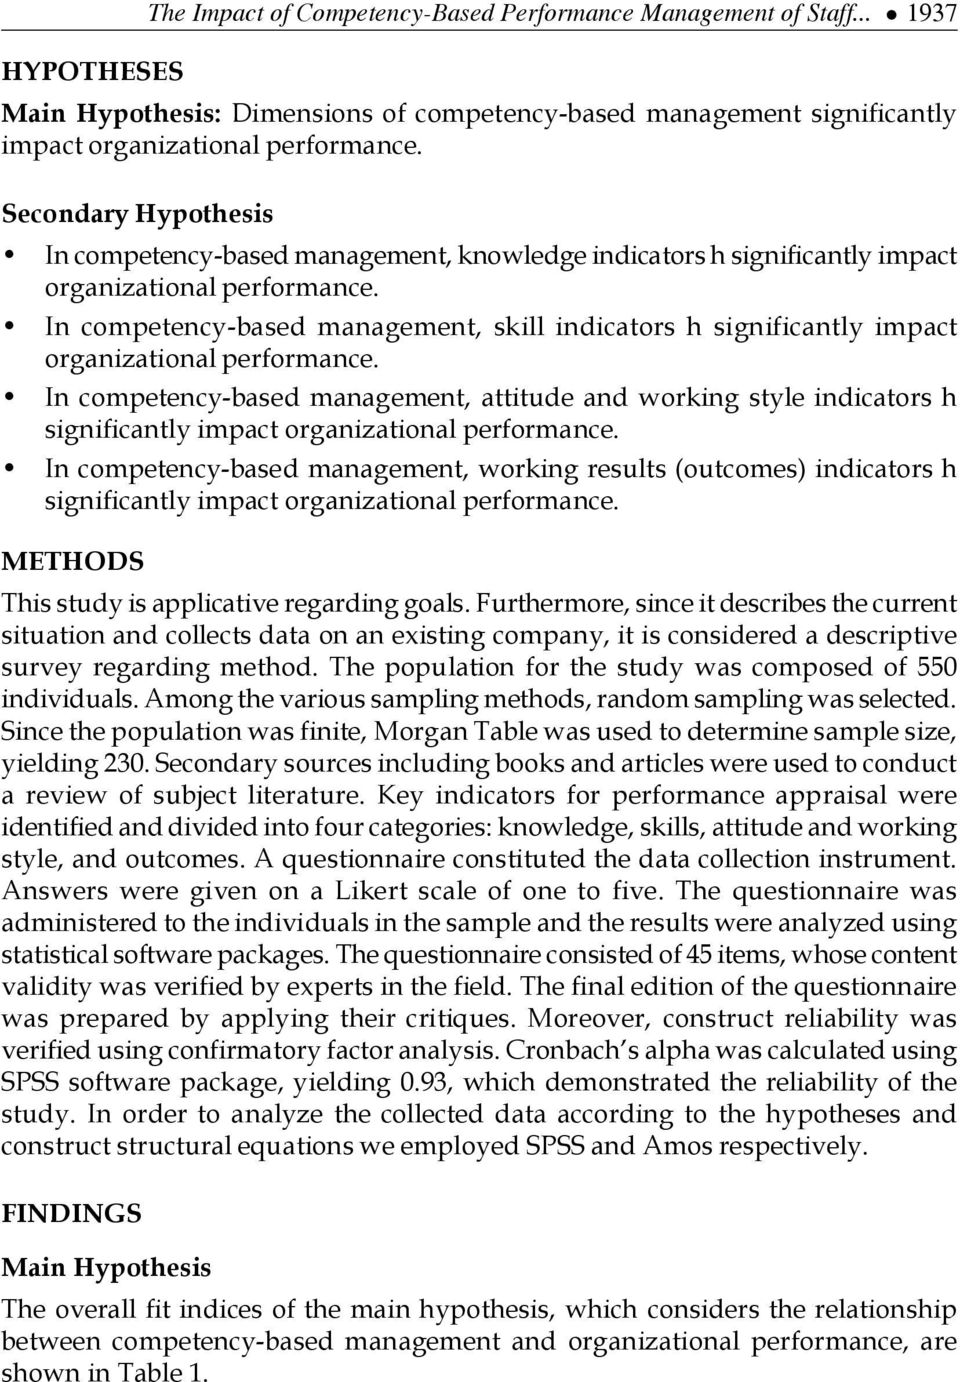 In competency-based management, skill indicators h significantly impact organizational performance.